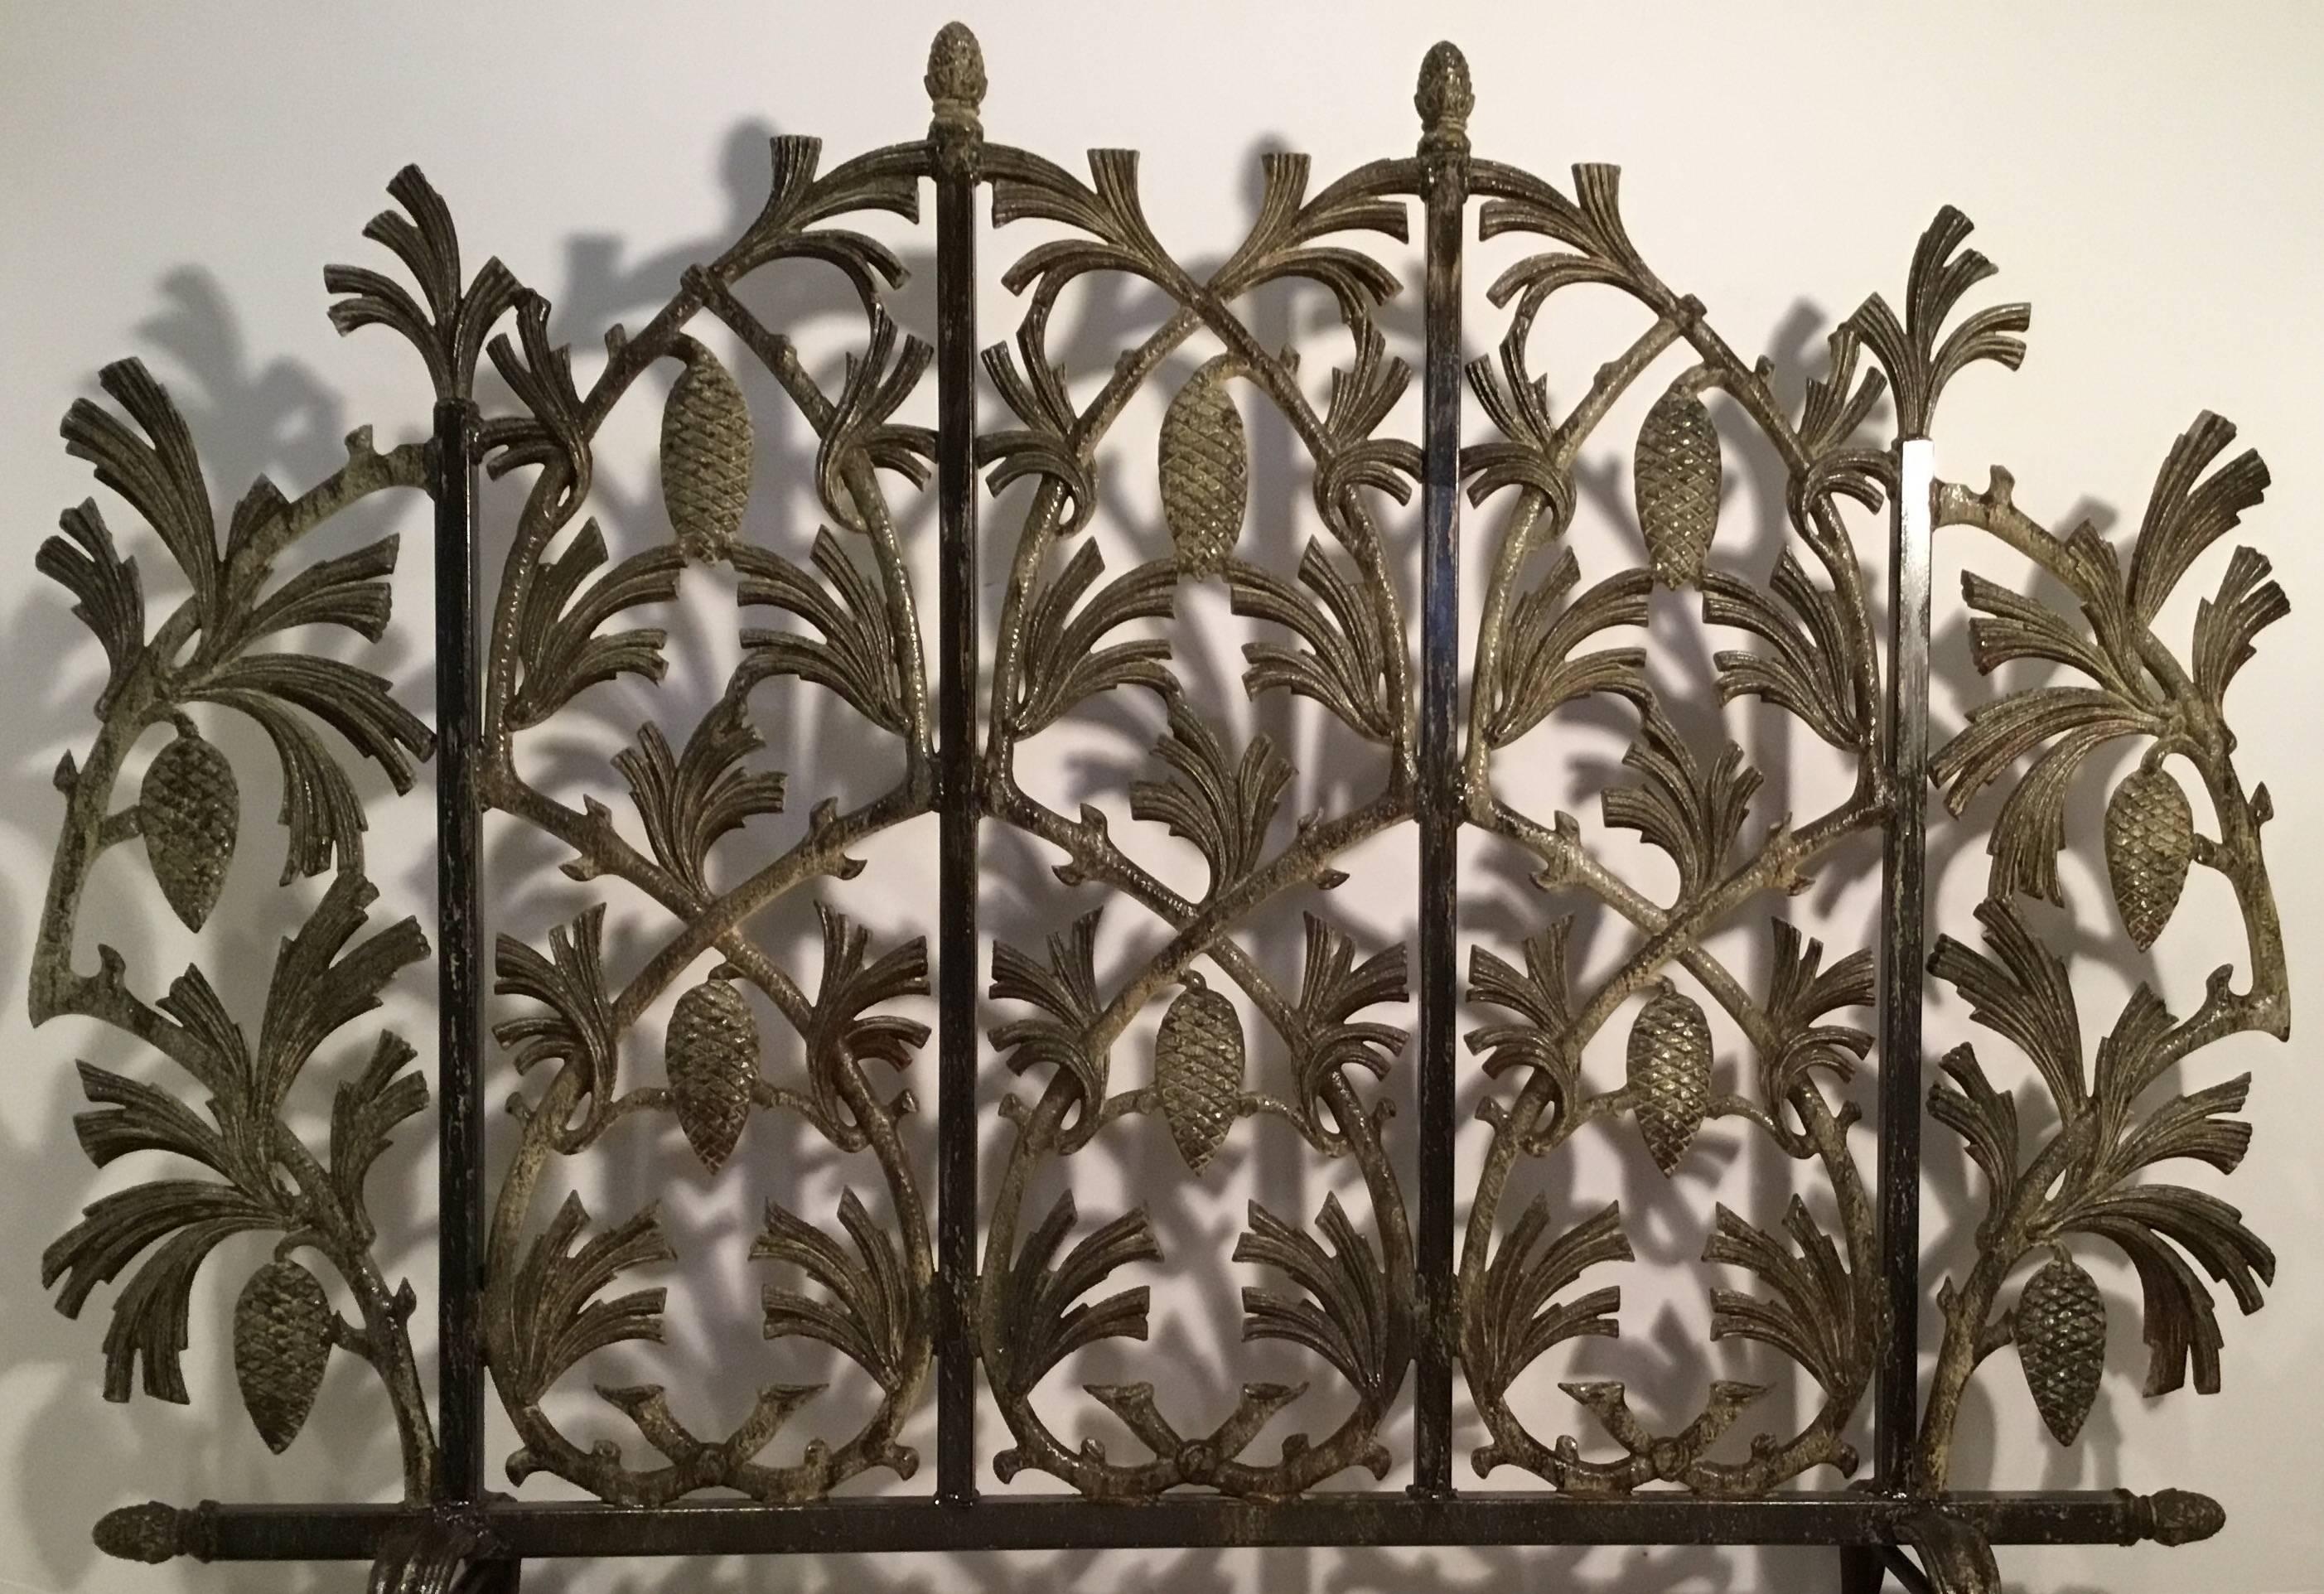 Fantastic looking fireplace screen made of cast iron, with vine and pinecone.
Motifs all around.
Great looking patina and rust treated.